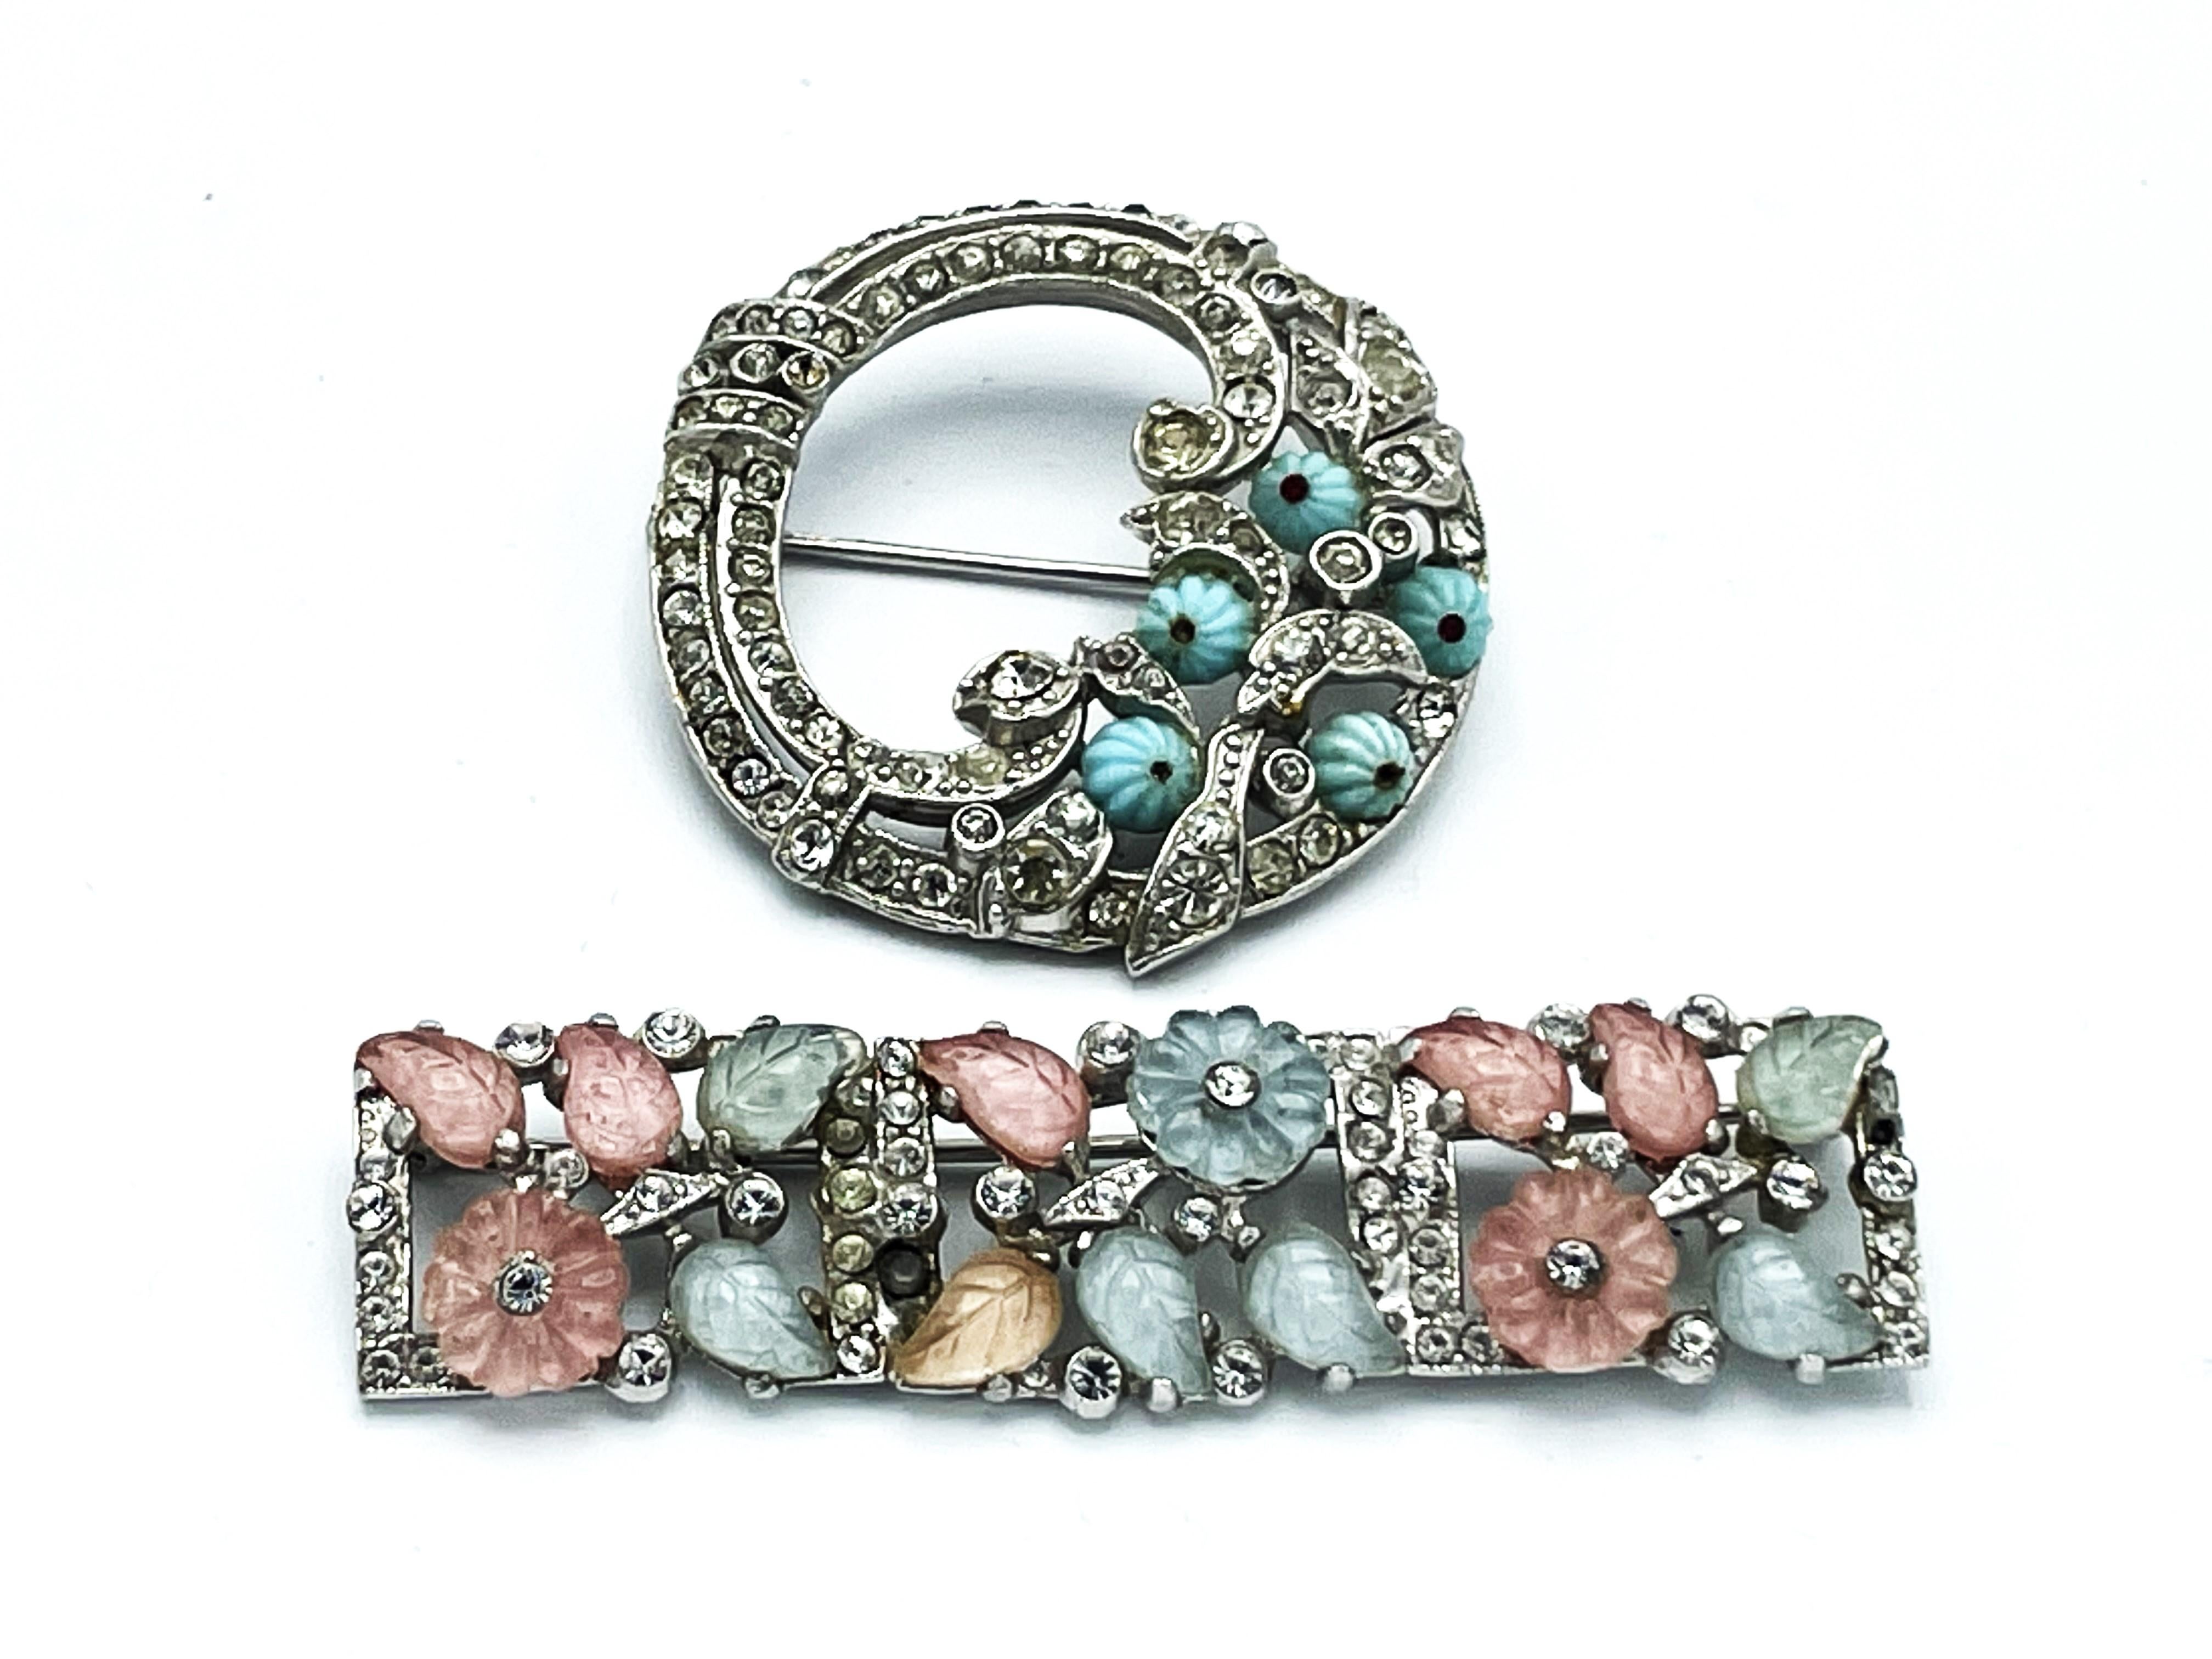 A small, fine brooch, art deco in a circle shape, set with many small rhinestones, with small turquoise-colored fruits cut in between. Crafted in rhodium-plated material. Made in the USA around 1940, unsigned piece  and in good